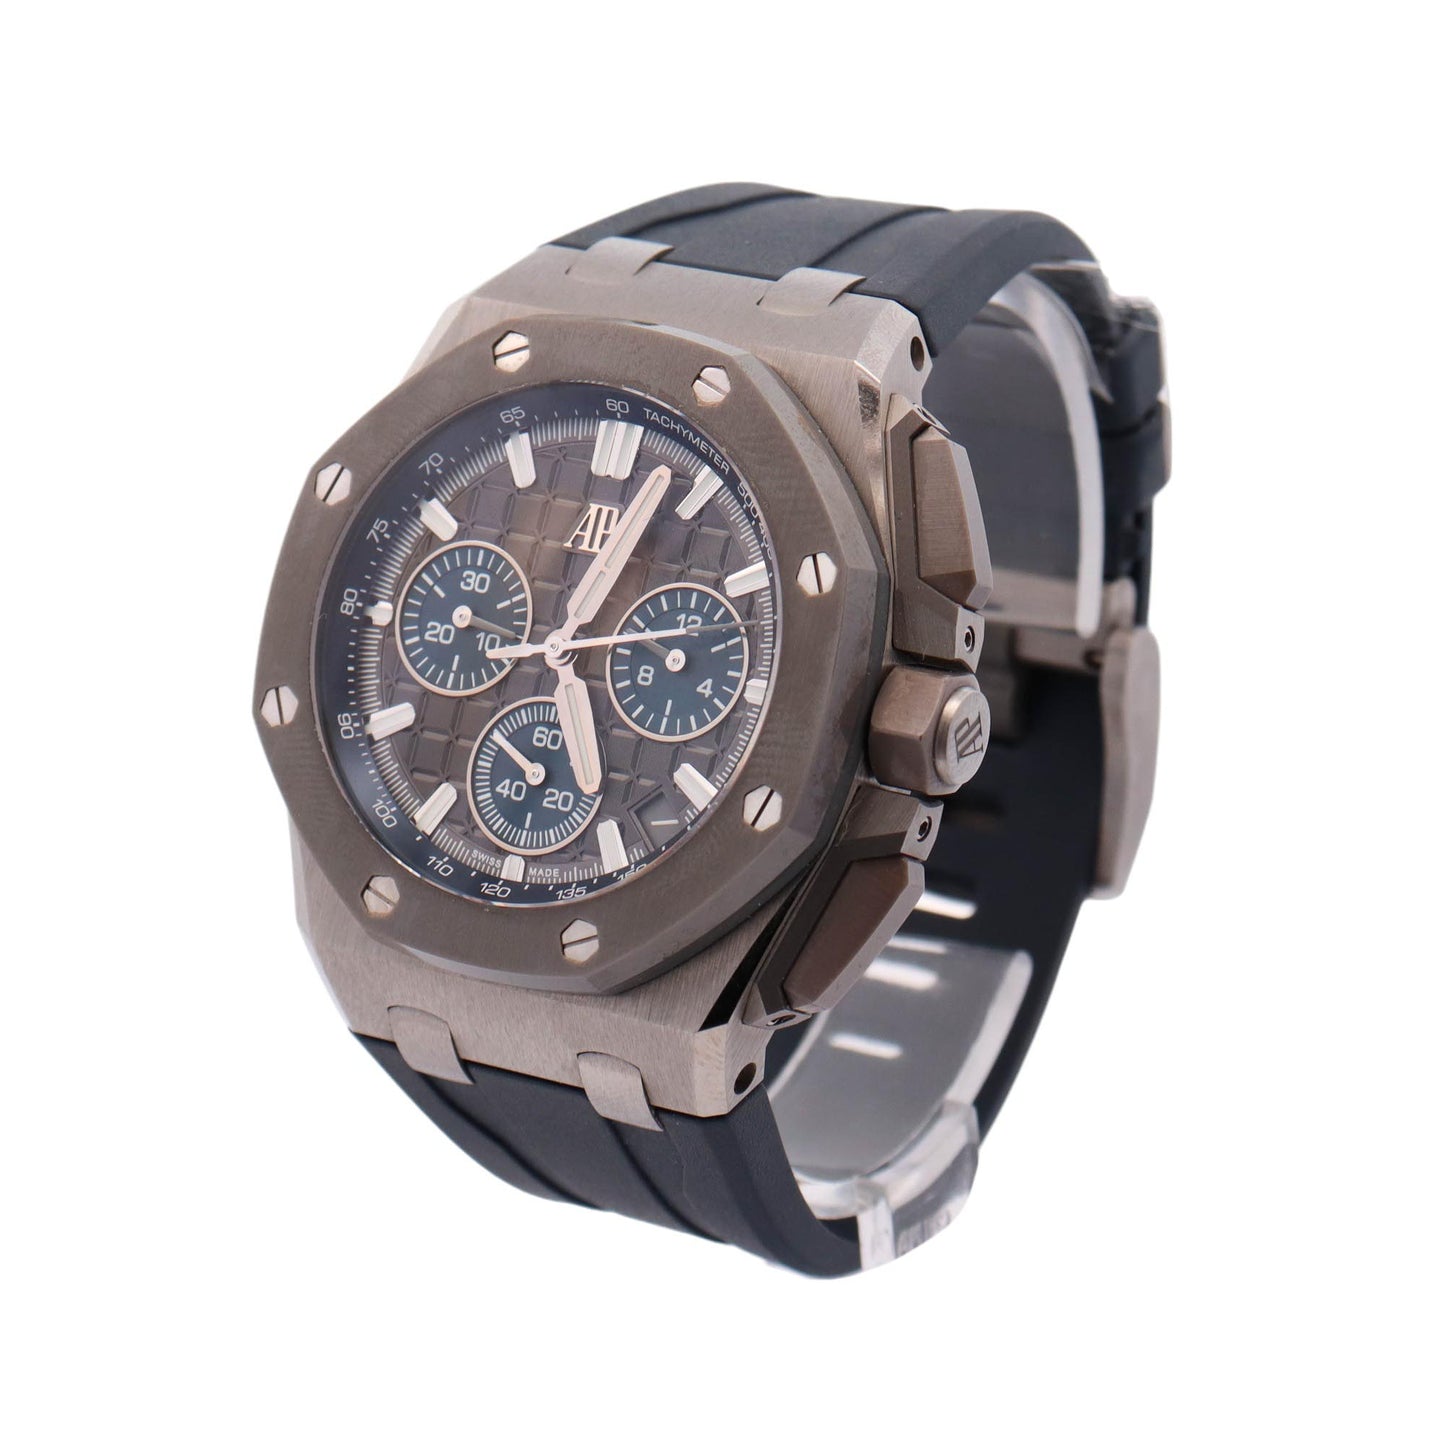 Audemars Piguet Royal Oak Offshore Stainless Steel Gray and Blue Chronograph Dial Watch Reference#  26420IO.OO.A009CA.01 - Happy Jewelers Fine Jewelry Lifetime Warranty